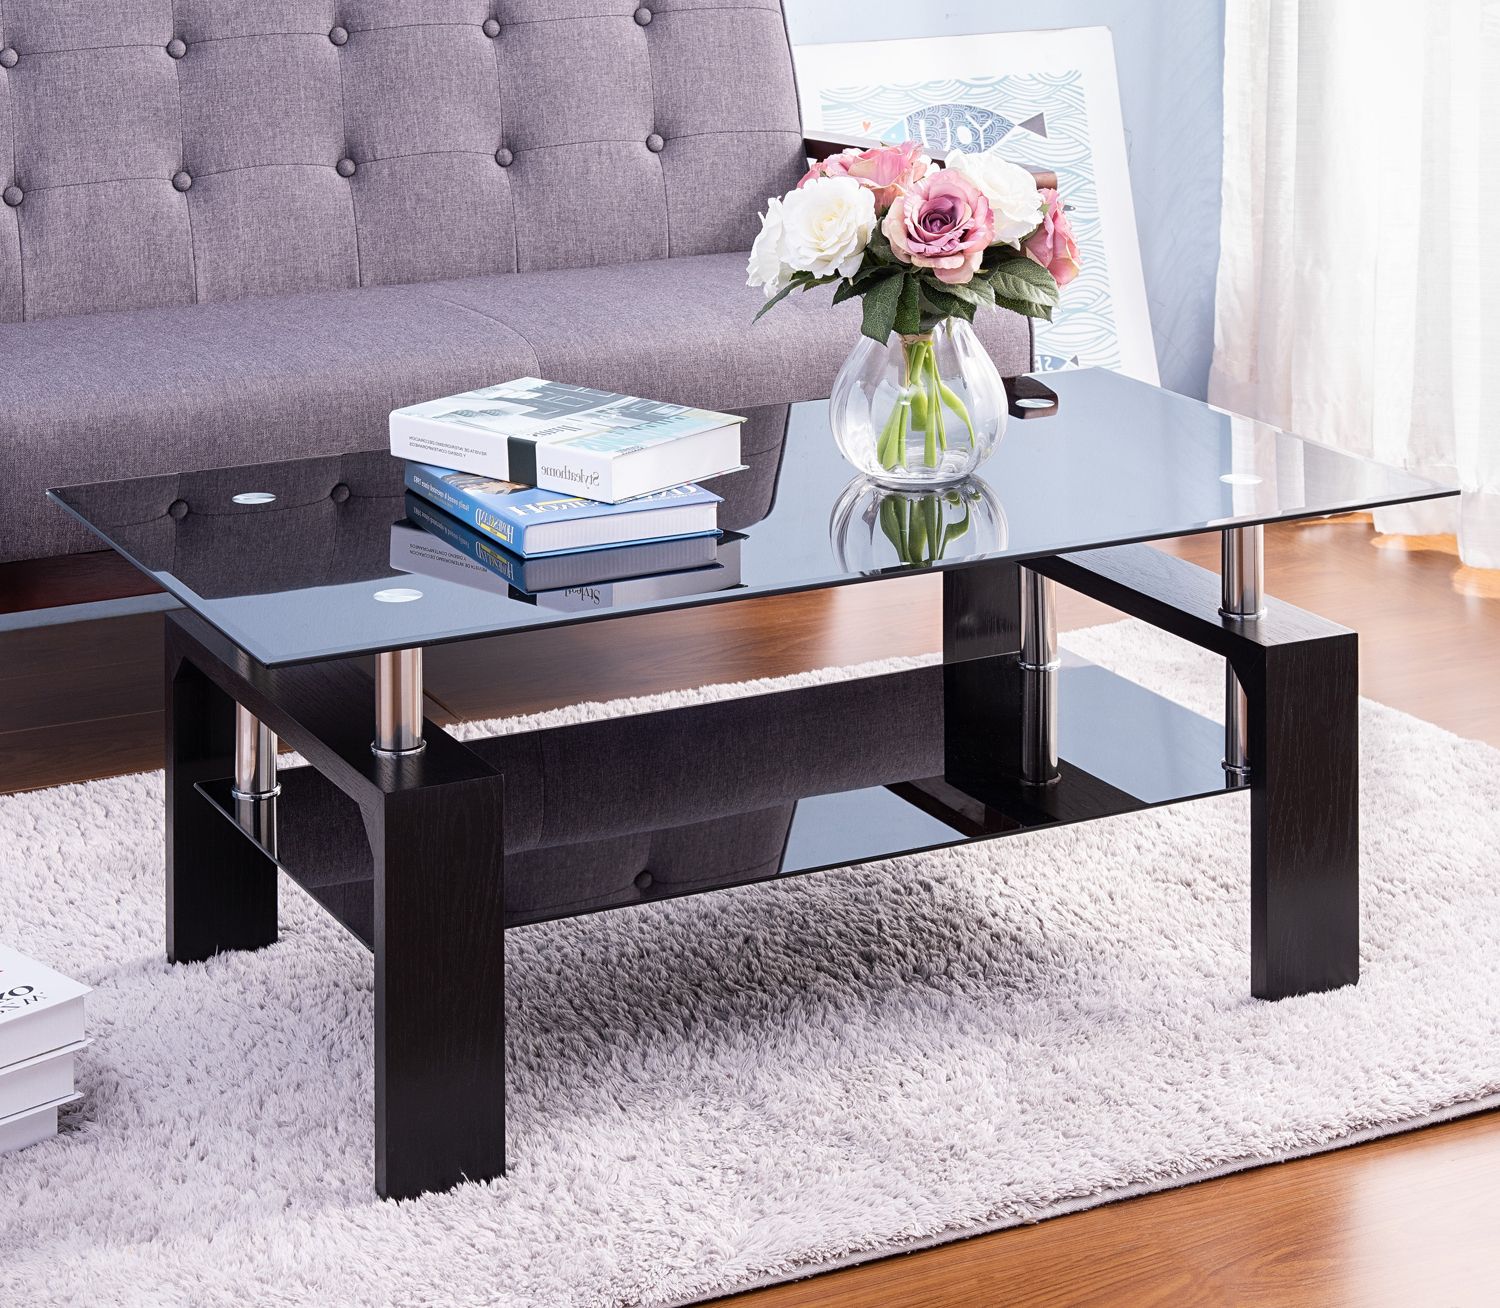 2018 Mirrored Modern Coffee Tables For Rectangle Glass Coffee Table, Modern Side Center Table (View 5 of 20)